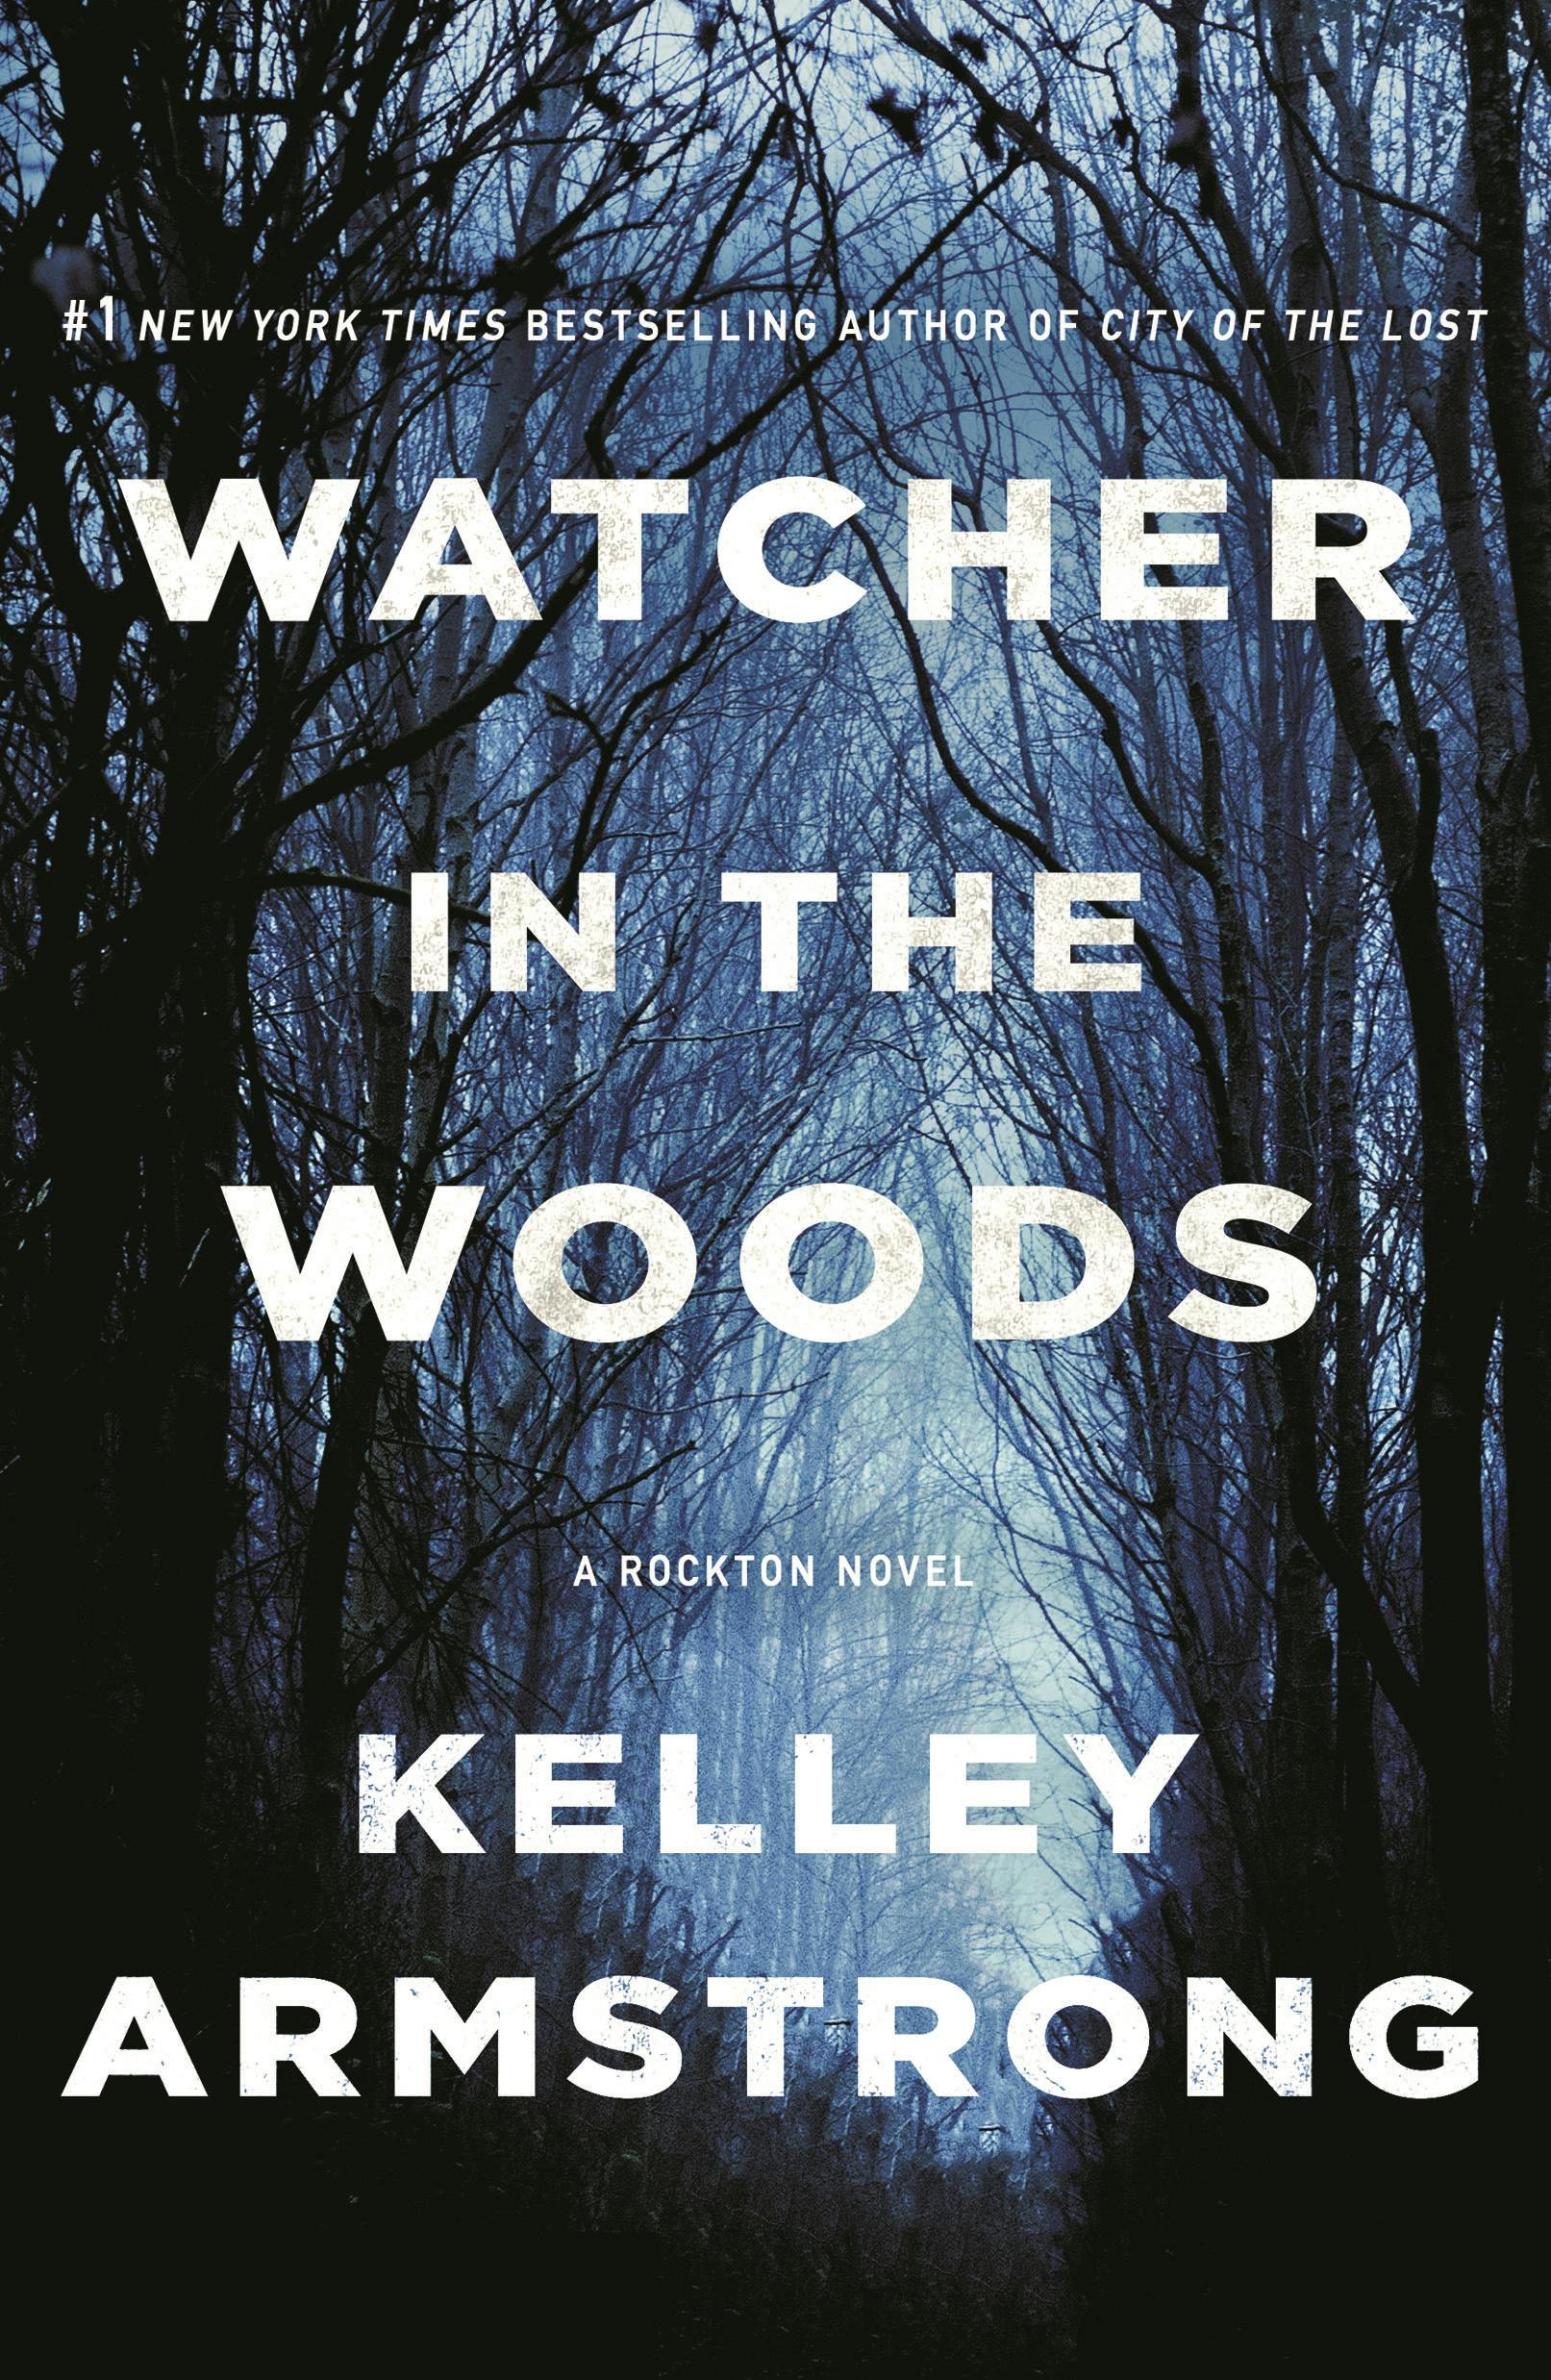 Watch The Watcher in the Woods